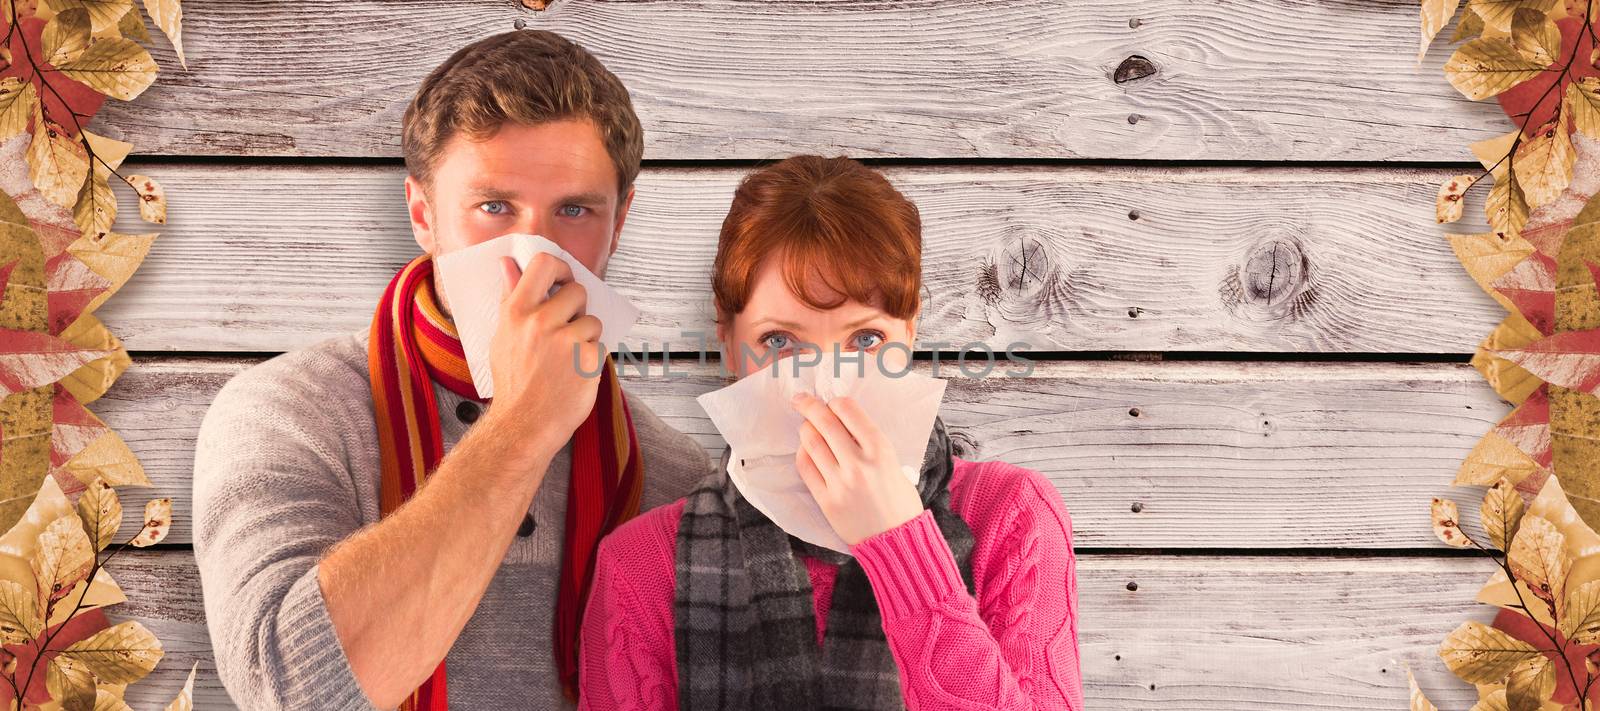 Couple blowing noses into tissues against digitally generated grey wooden planks